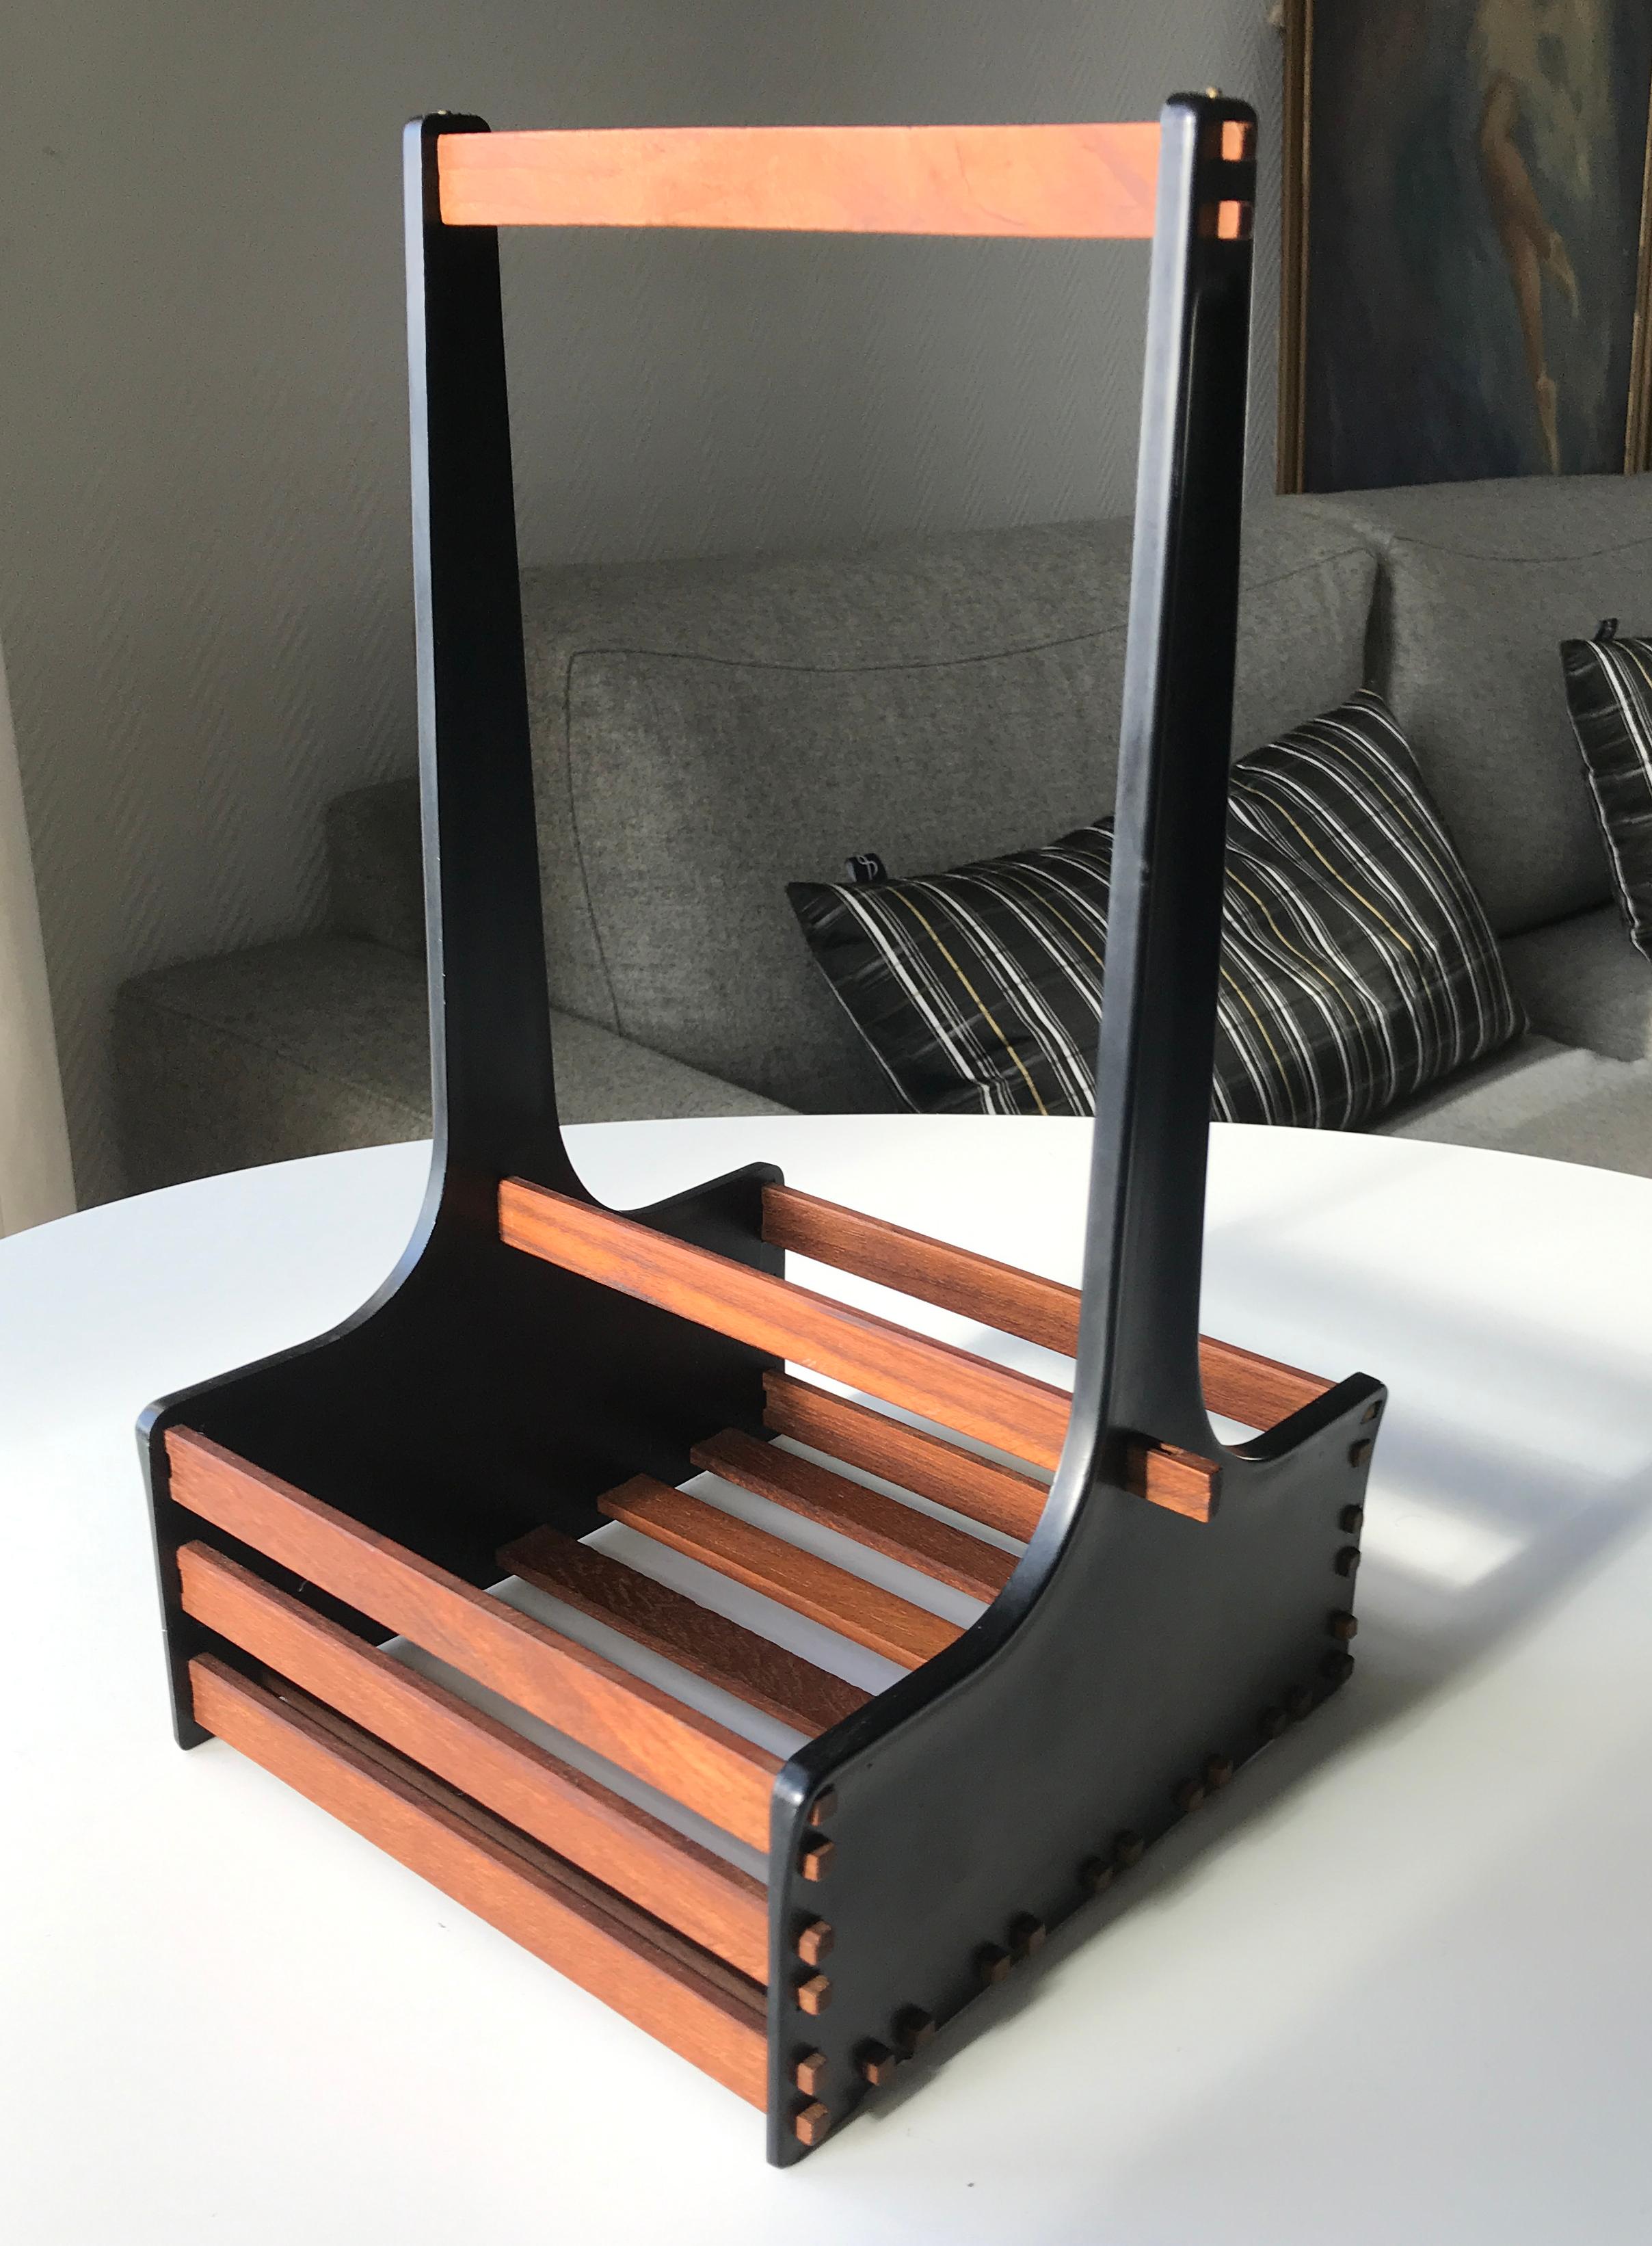 Mid-Century Niels Prahm design Copenhagen rare Danish teak bottle tray holder. Black acryl frame supporting massive teak stringers creating a great contrasts between the materials. The size makes it suitable for both beverage bottles as well as an